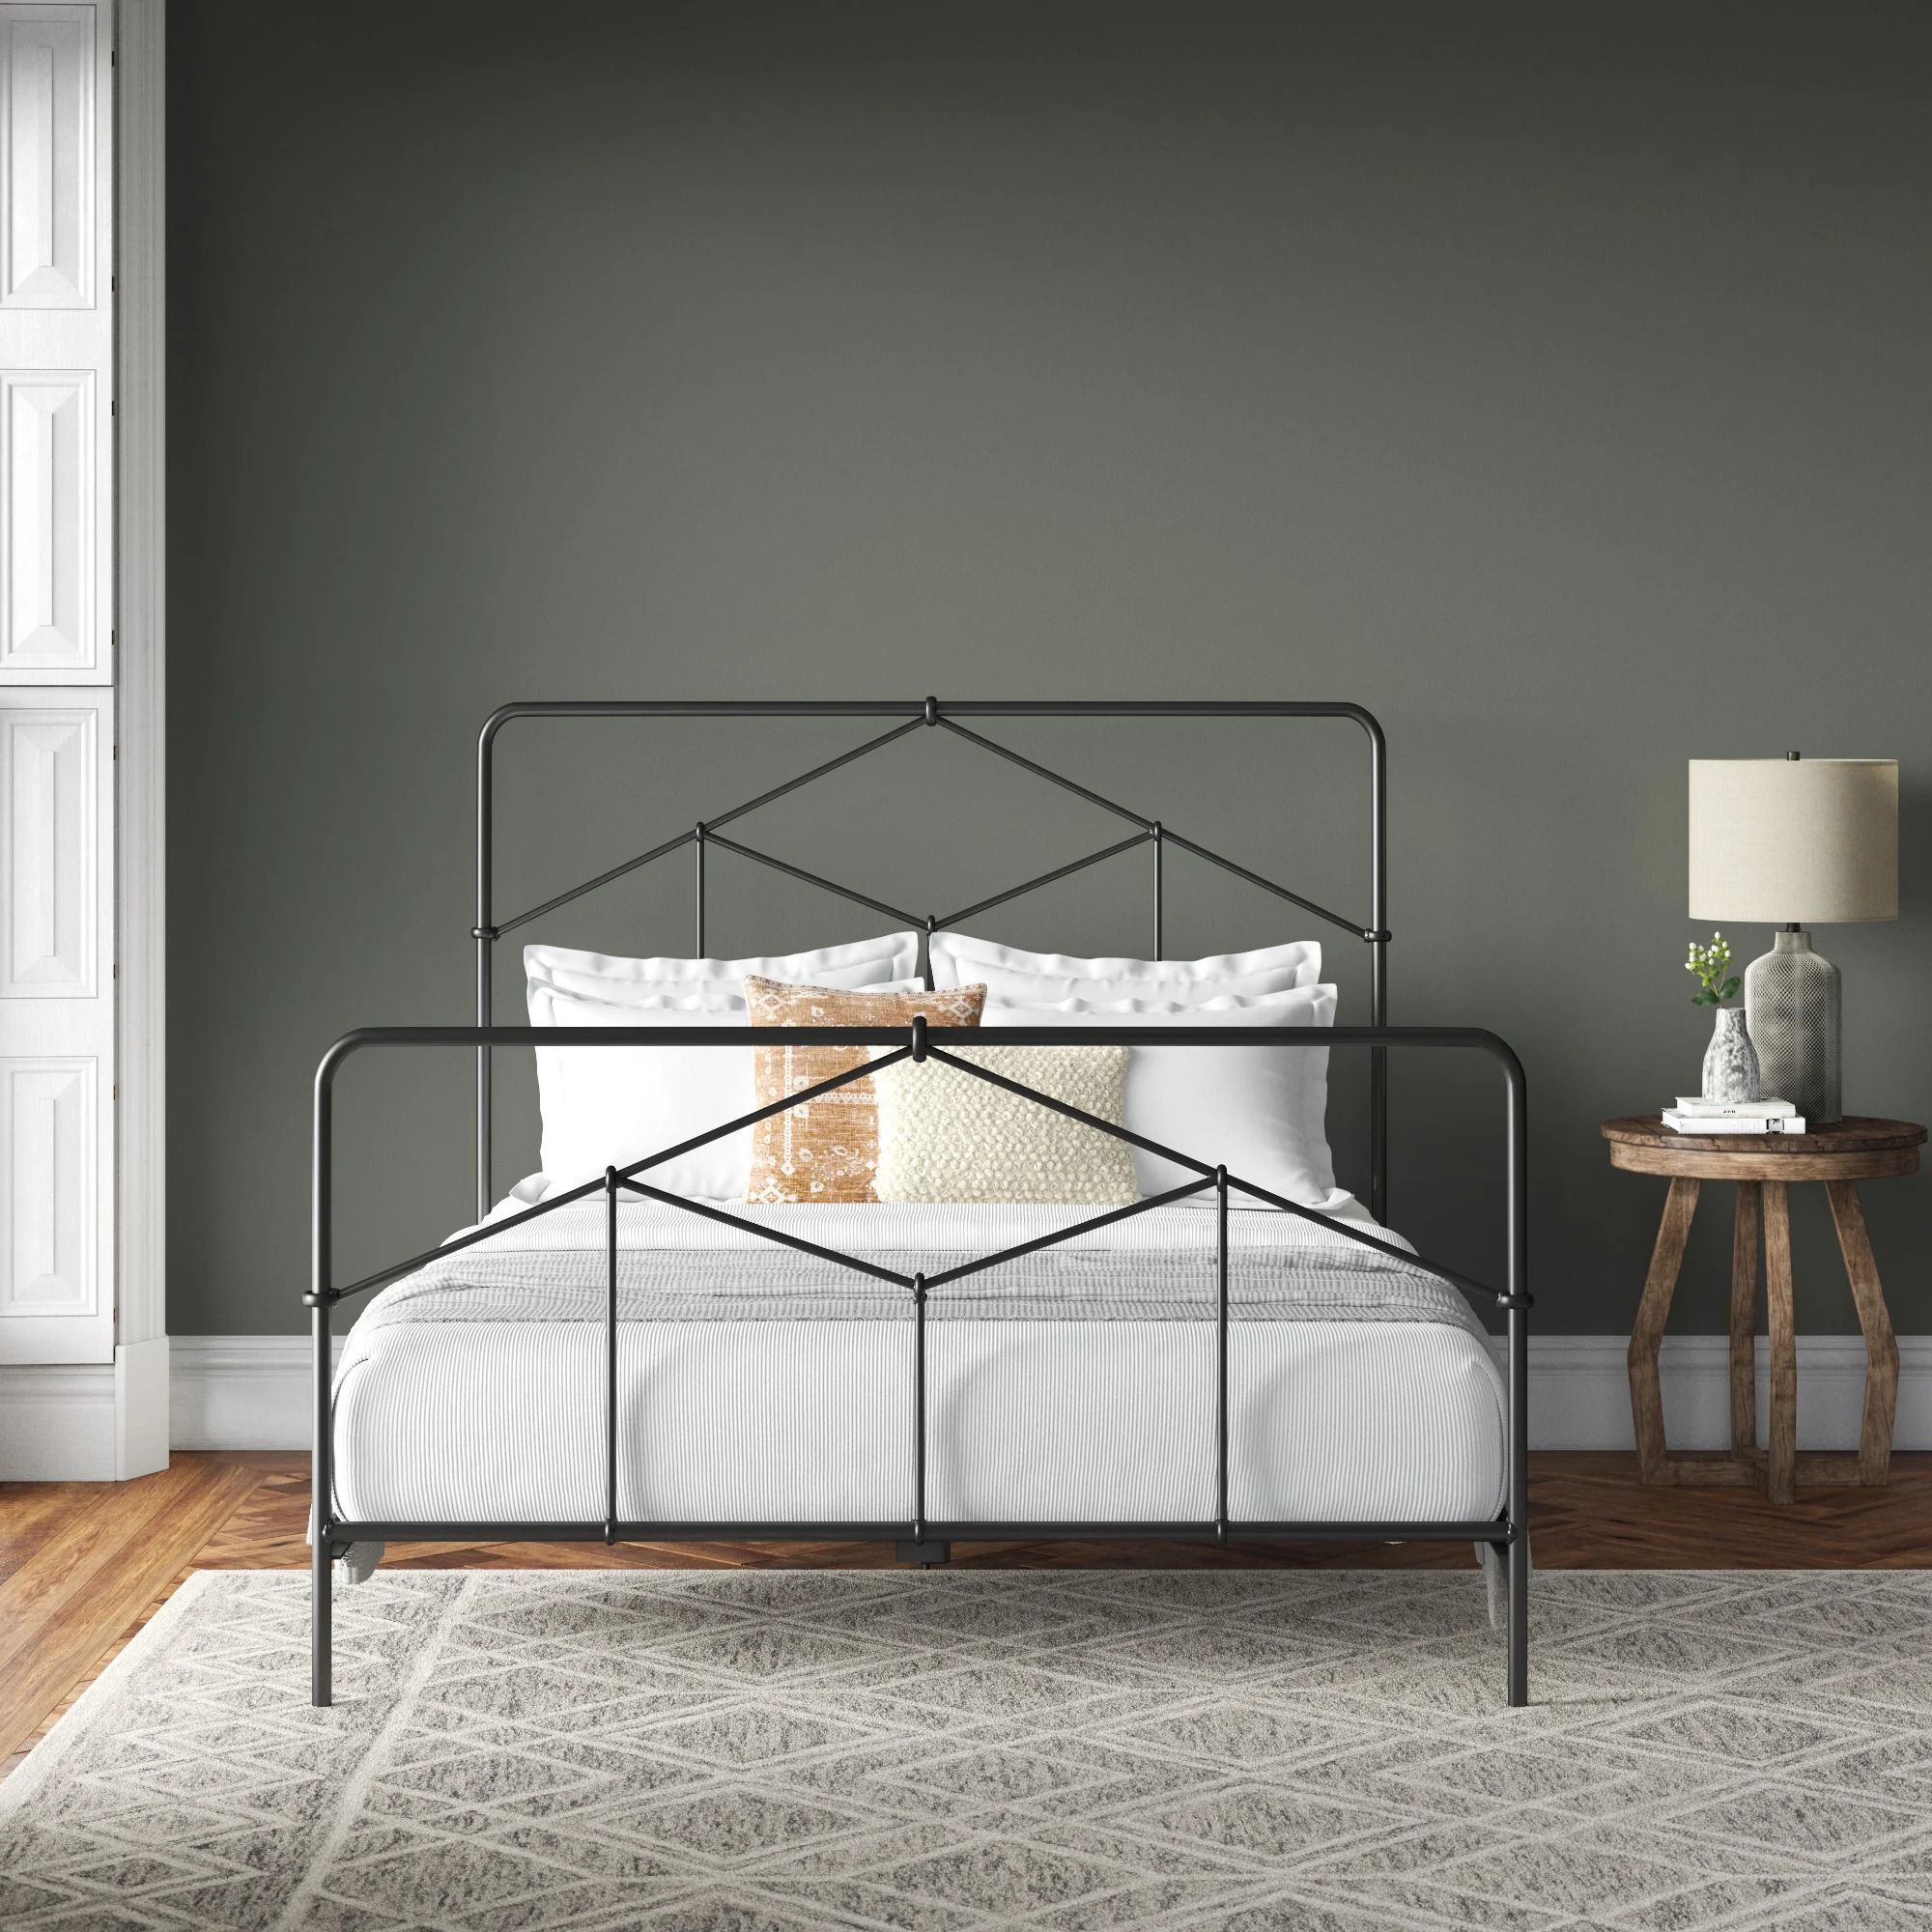 10 Best Box Spring Bed Frames Beds, Full Size Bed Frame And Box Spring Combination